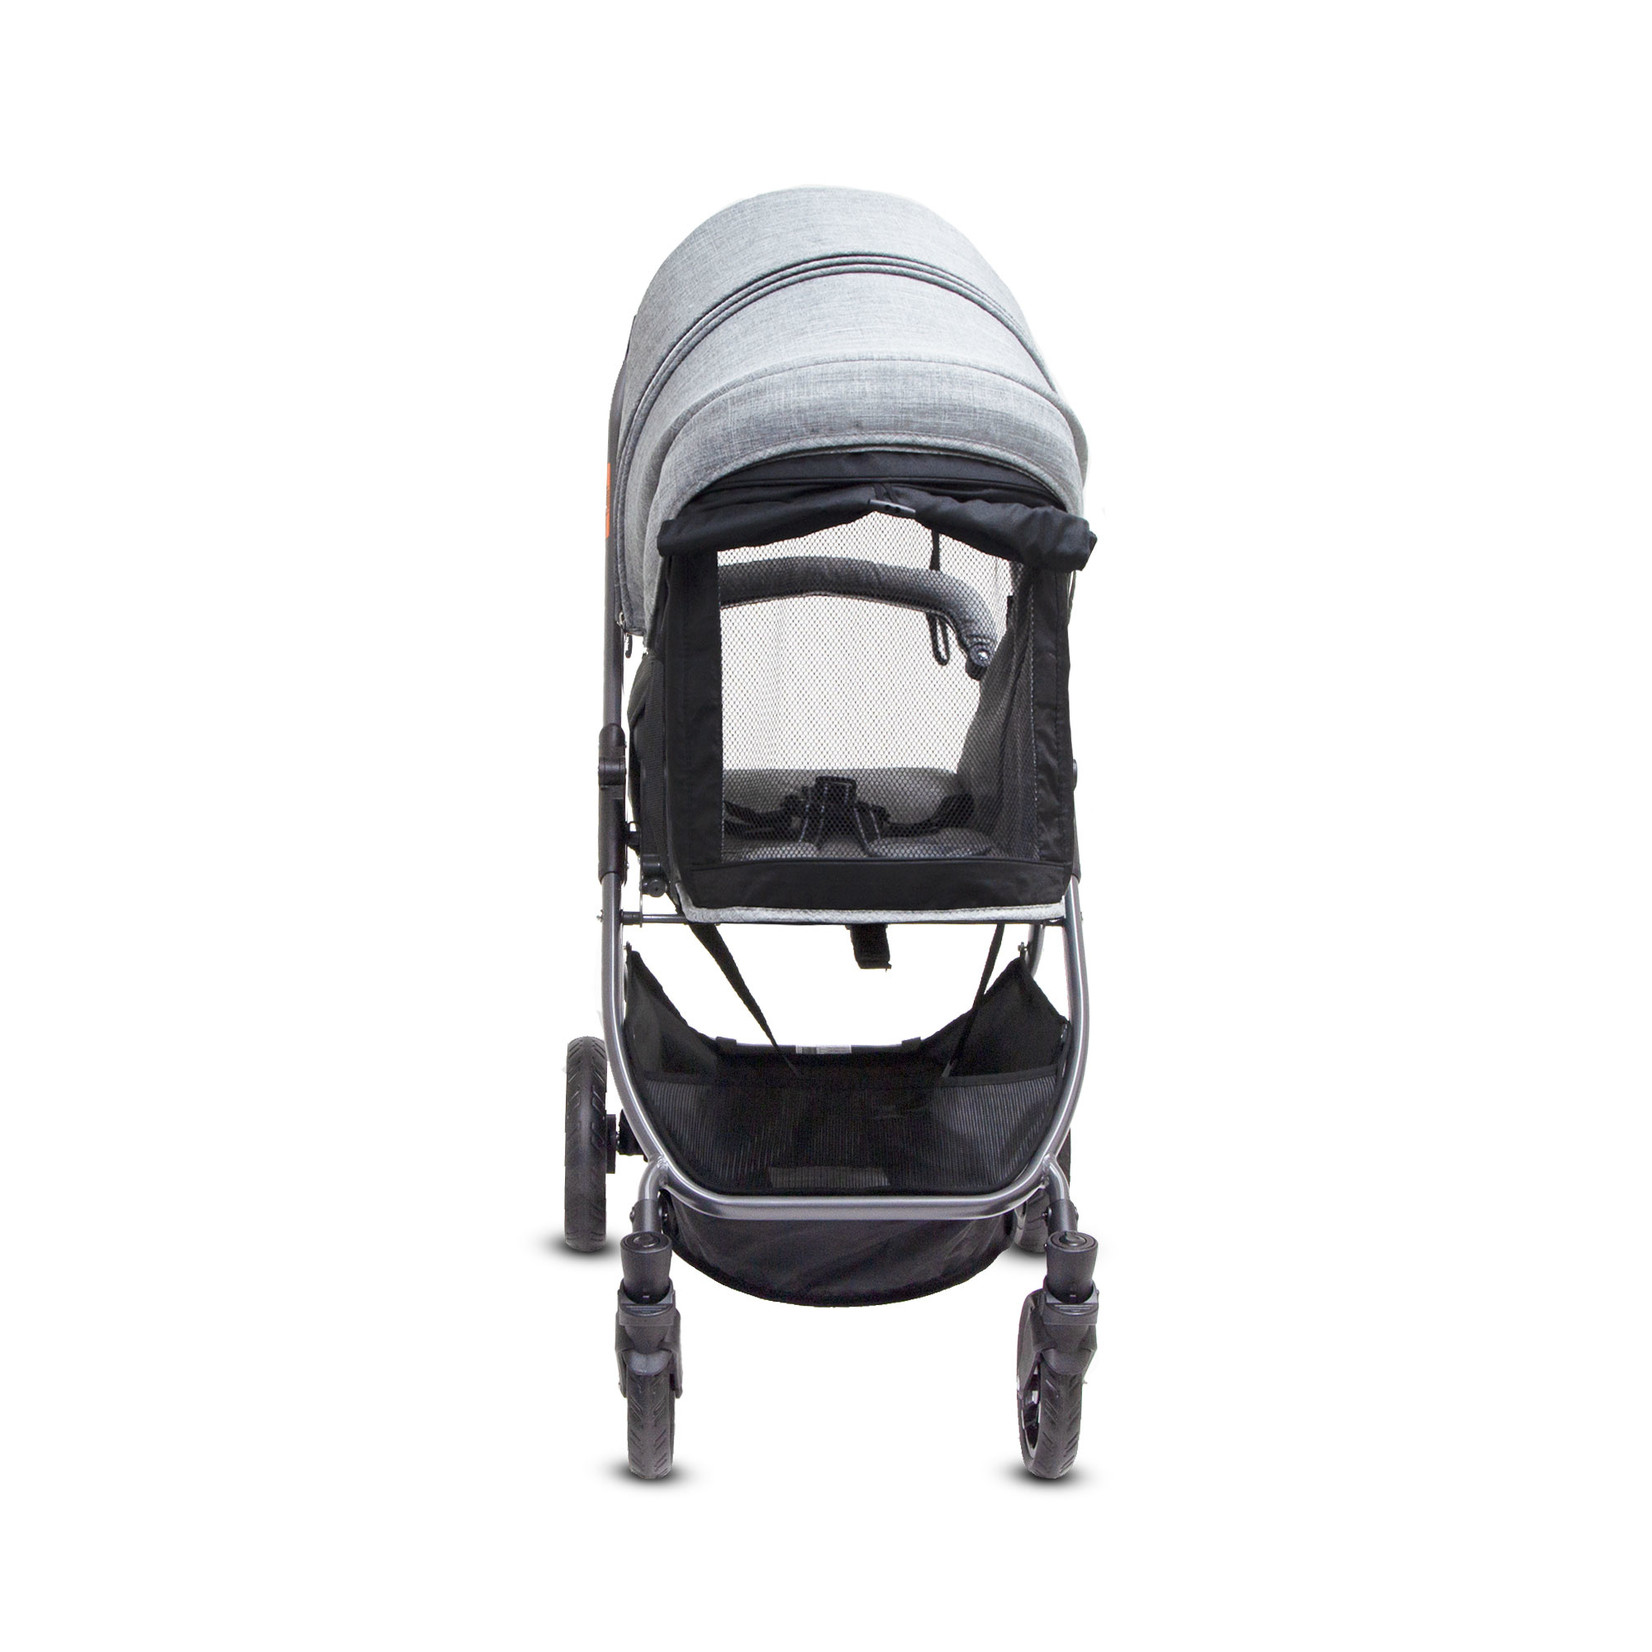 Valco Baby Snap Ultra Tailormade-Grey Marle